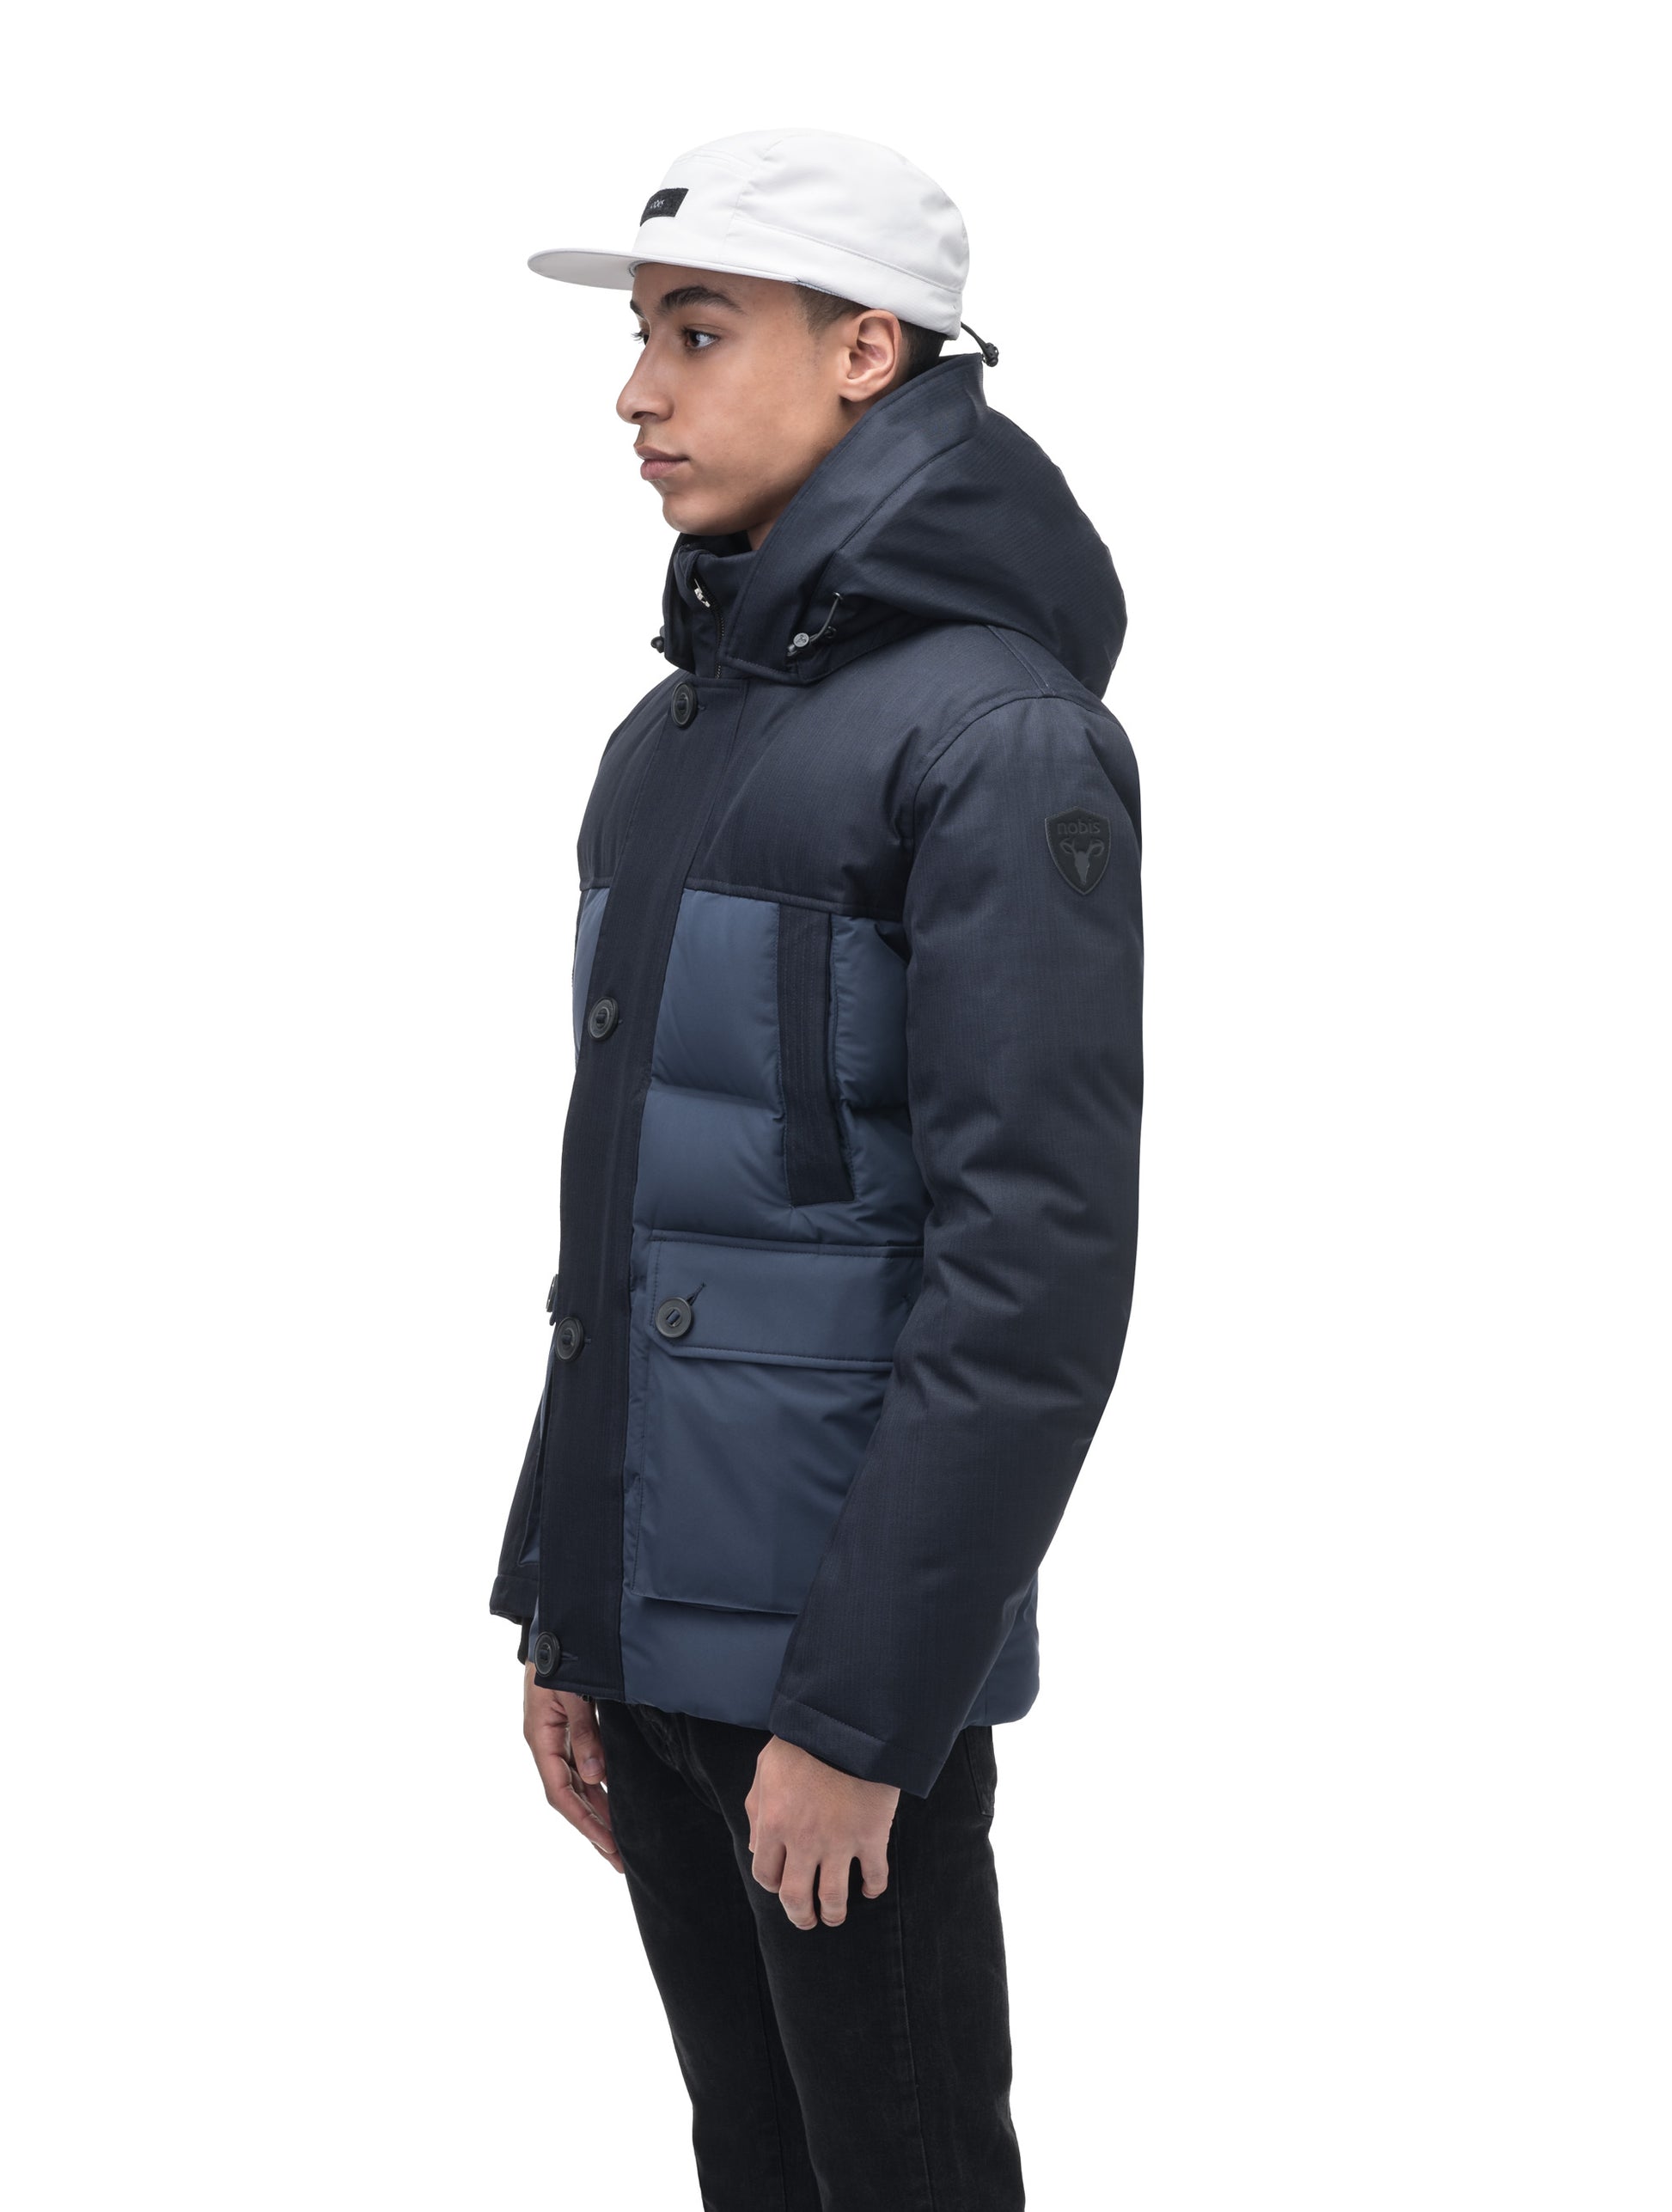 Cardinal Men's Puffer Parka in hip length, Canadian duck down insulation, removable hood, quilted body, and two-way front zipper, in Navy